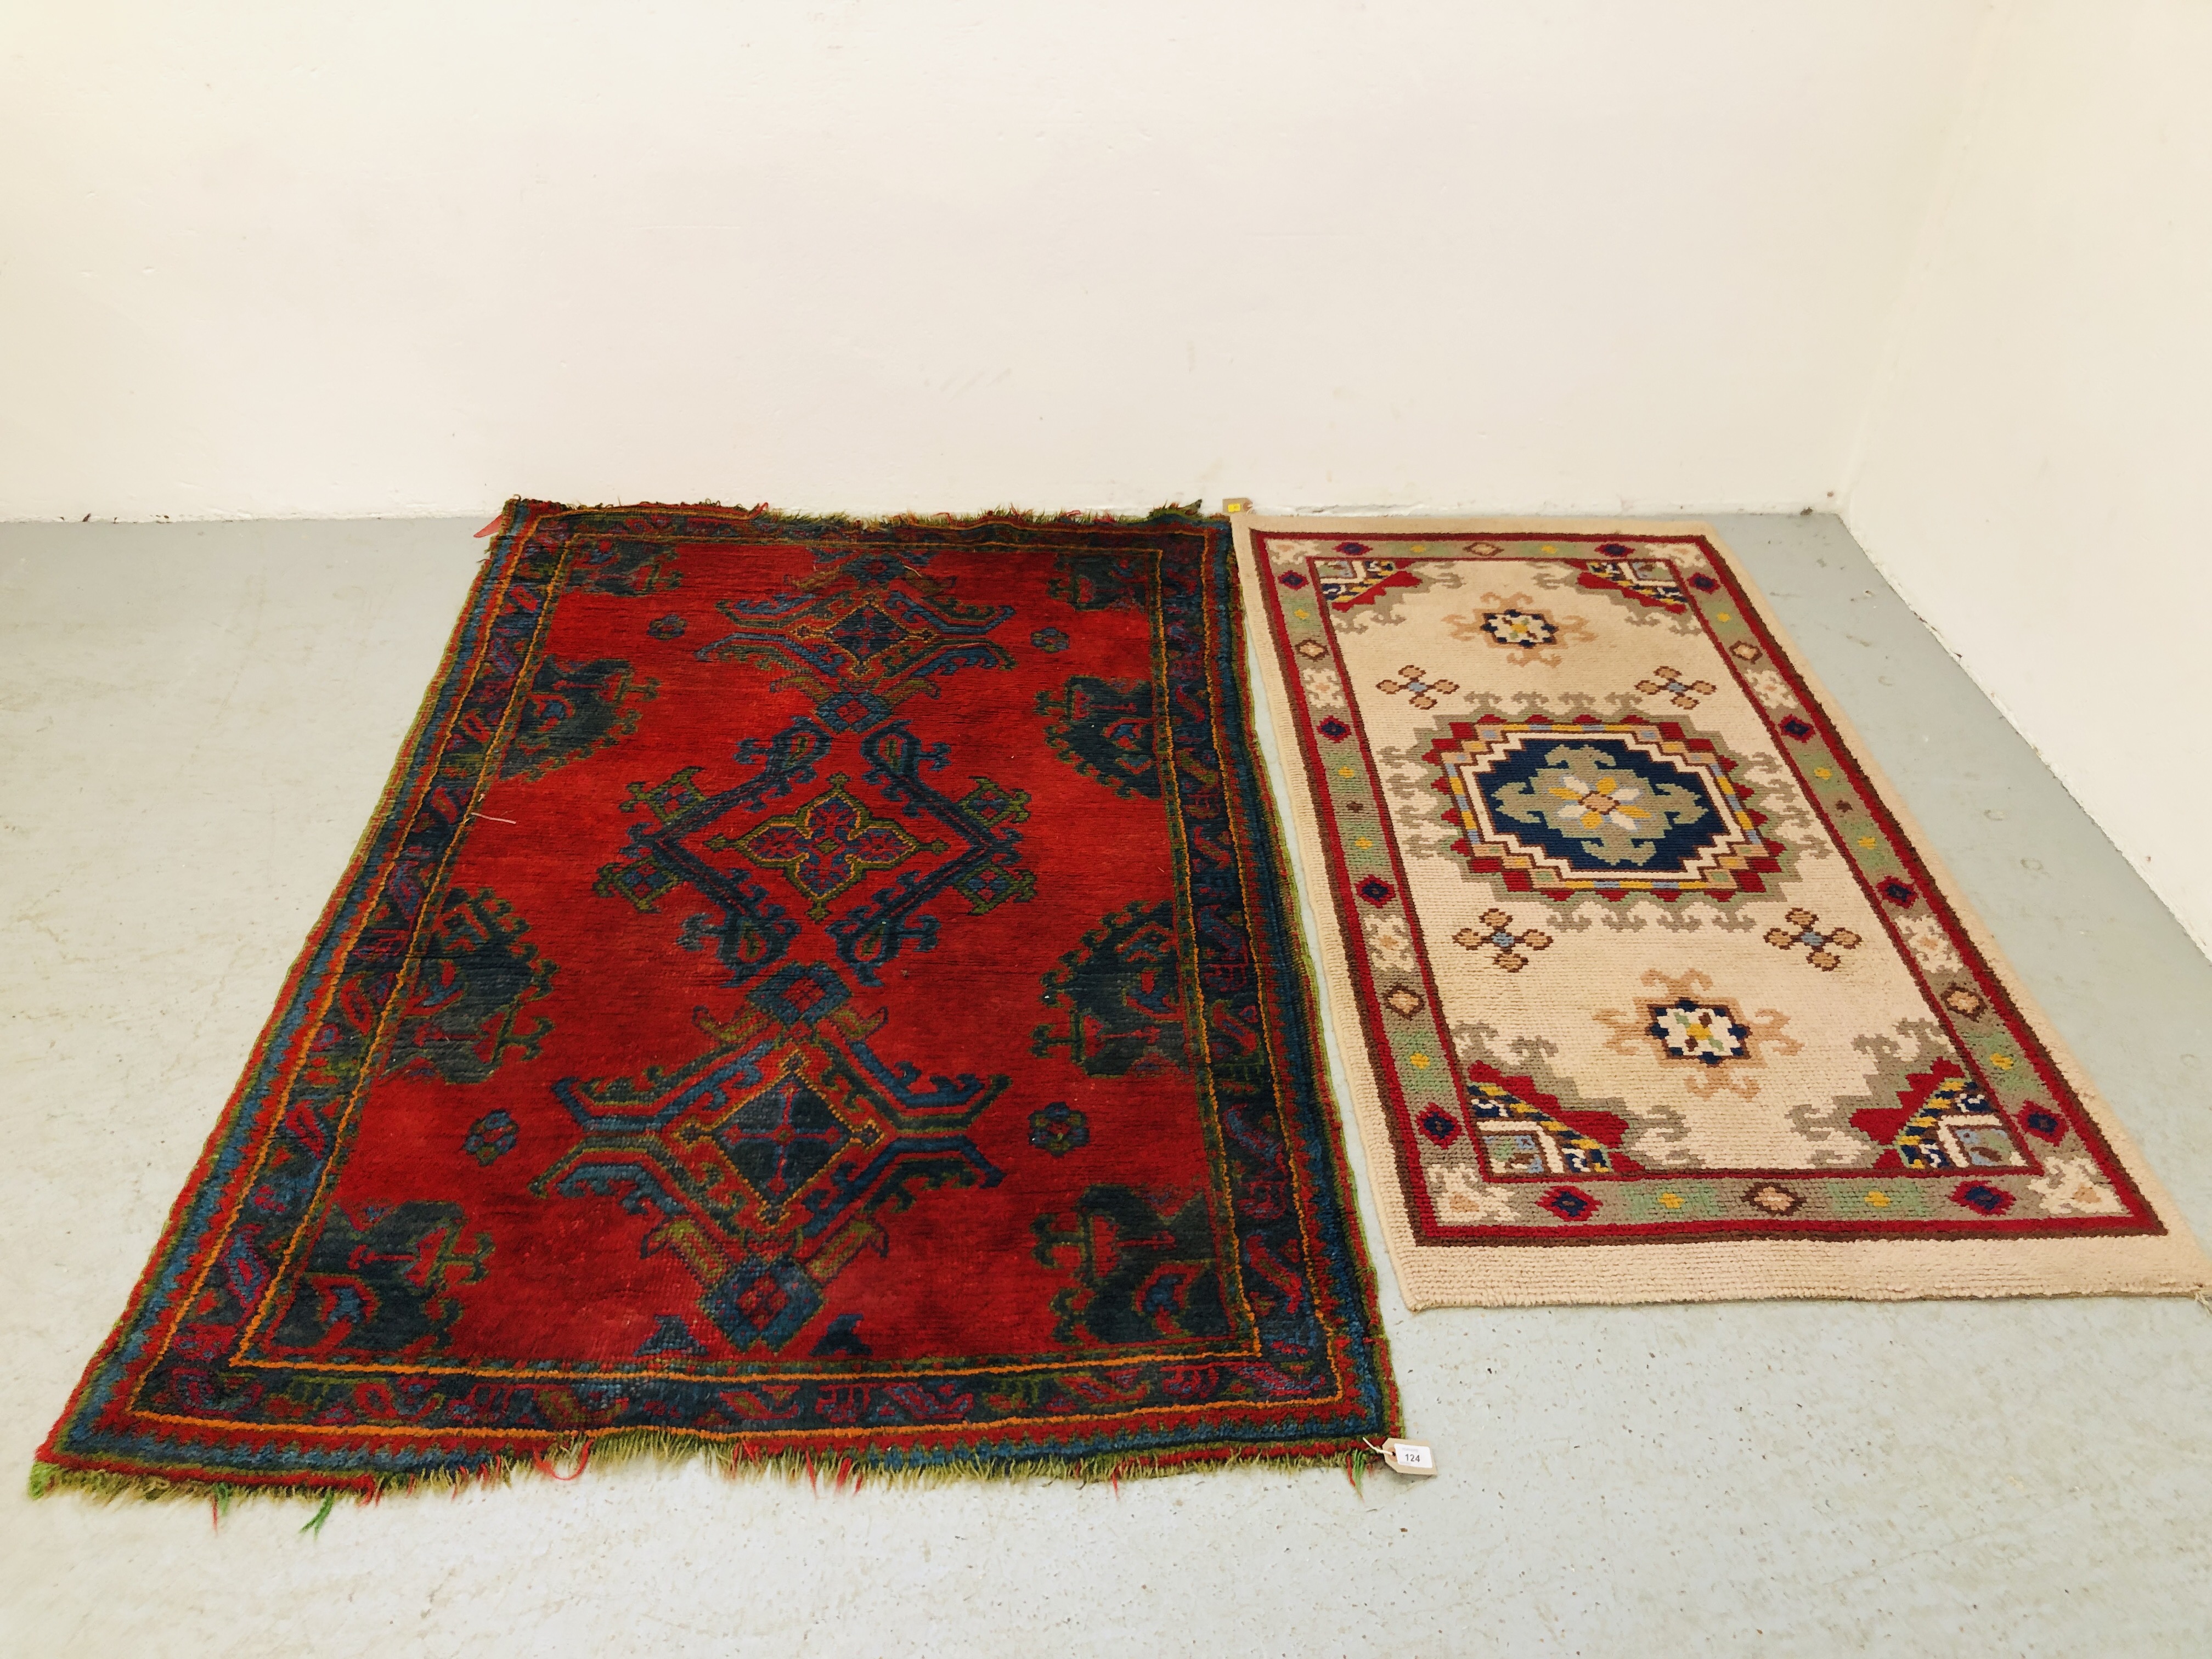 TRADITIONAL RUG OF IMPERIAL COLOUR, LENGTH 196CM. X WIDTH 129CM.